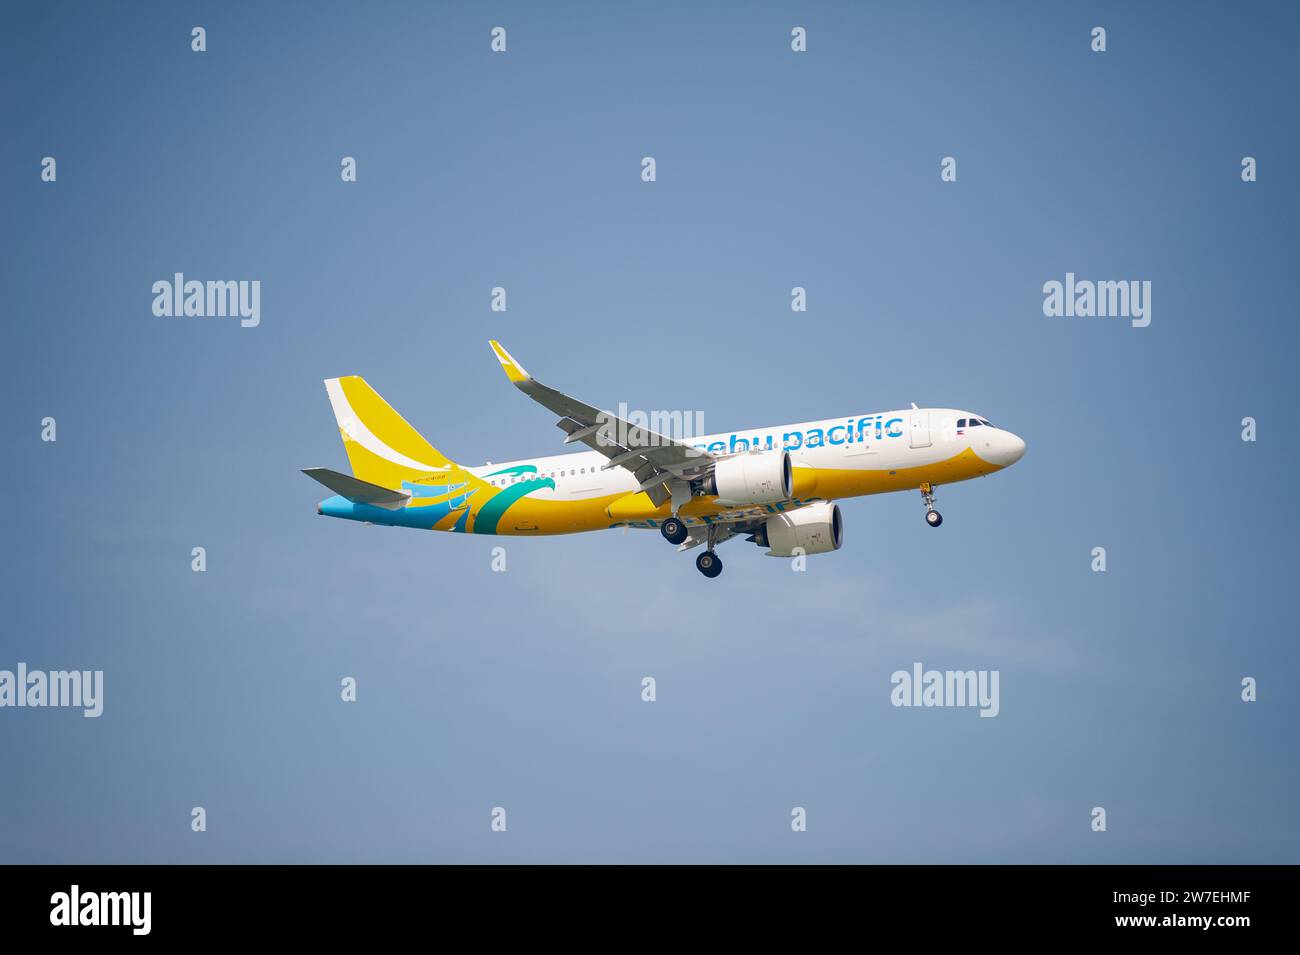 30.07.2023, Singapore, Singapur,  - An Airbus A320-200 Neo passenger aircraft of the Philippine airline Cebu Pacific Air, registration RP-C4158, appro Stock Photo